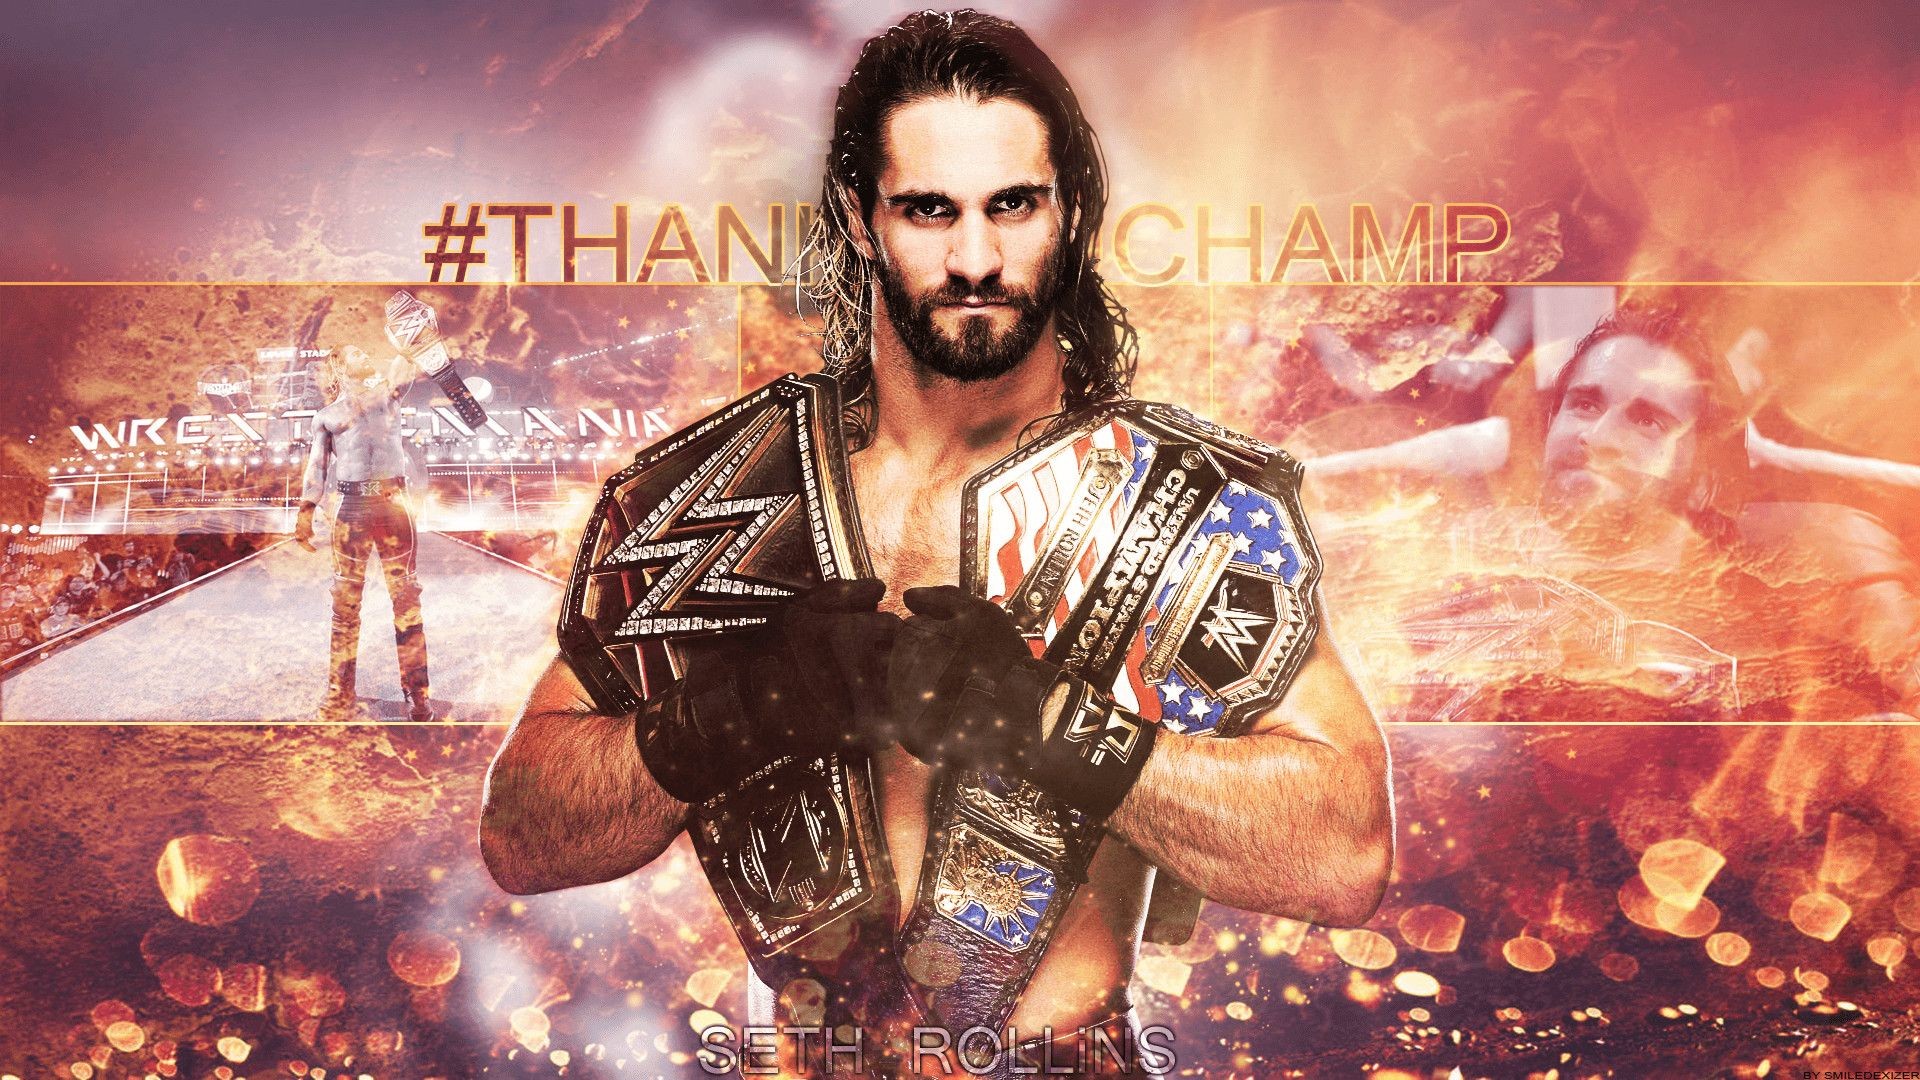 1920x1080 Top 50 WWE Seth Rollins Wallpapers Download HD Images